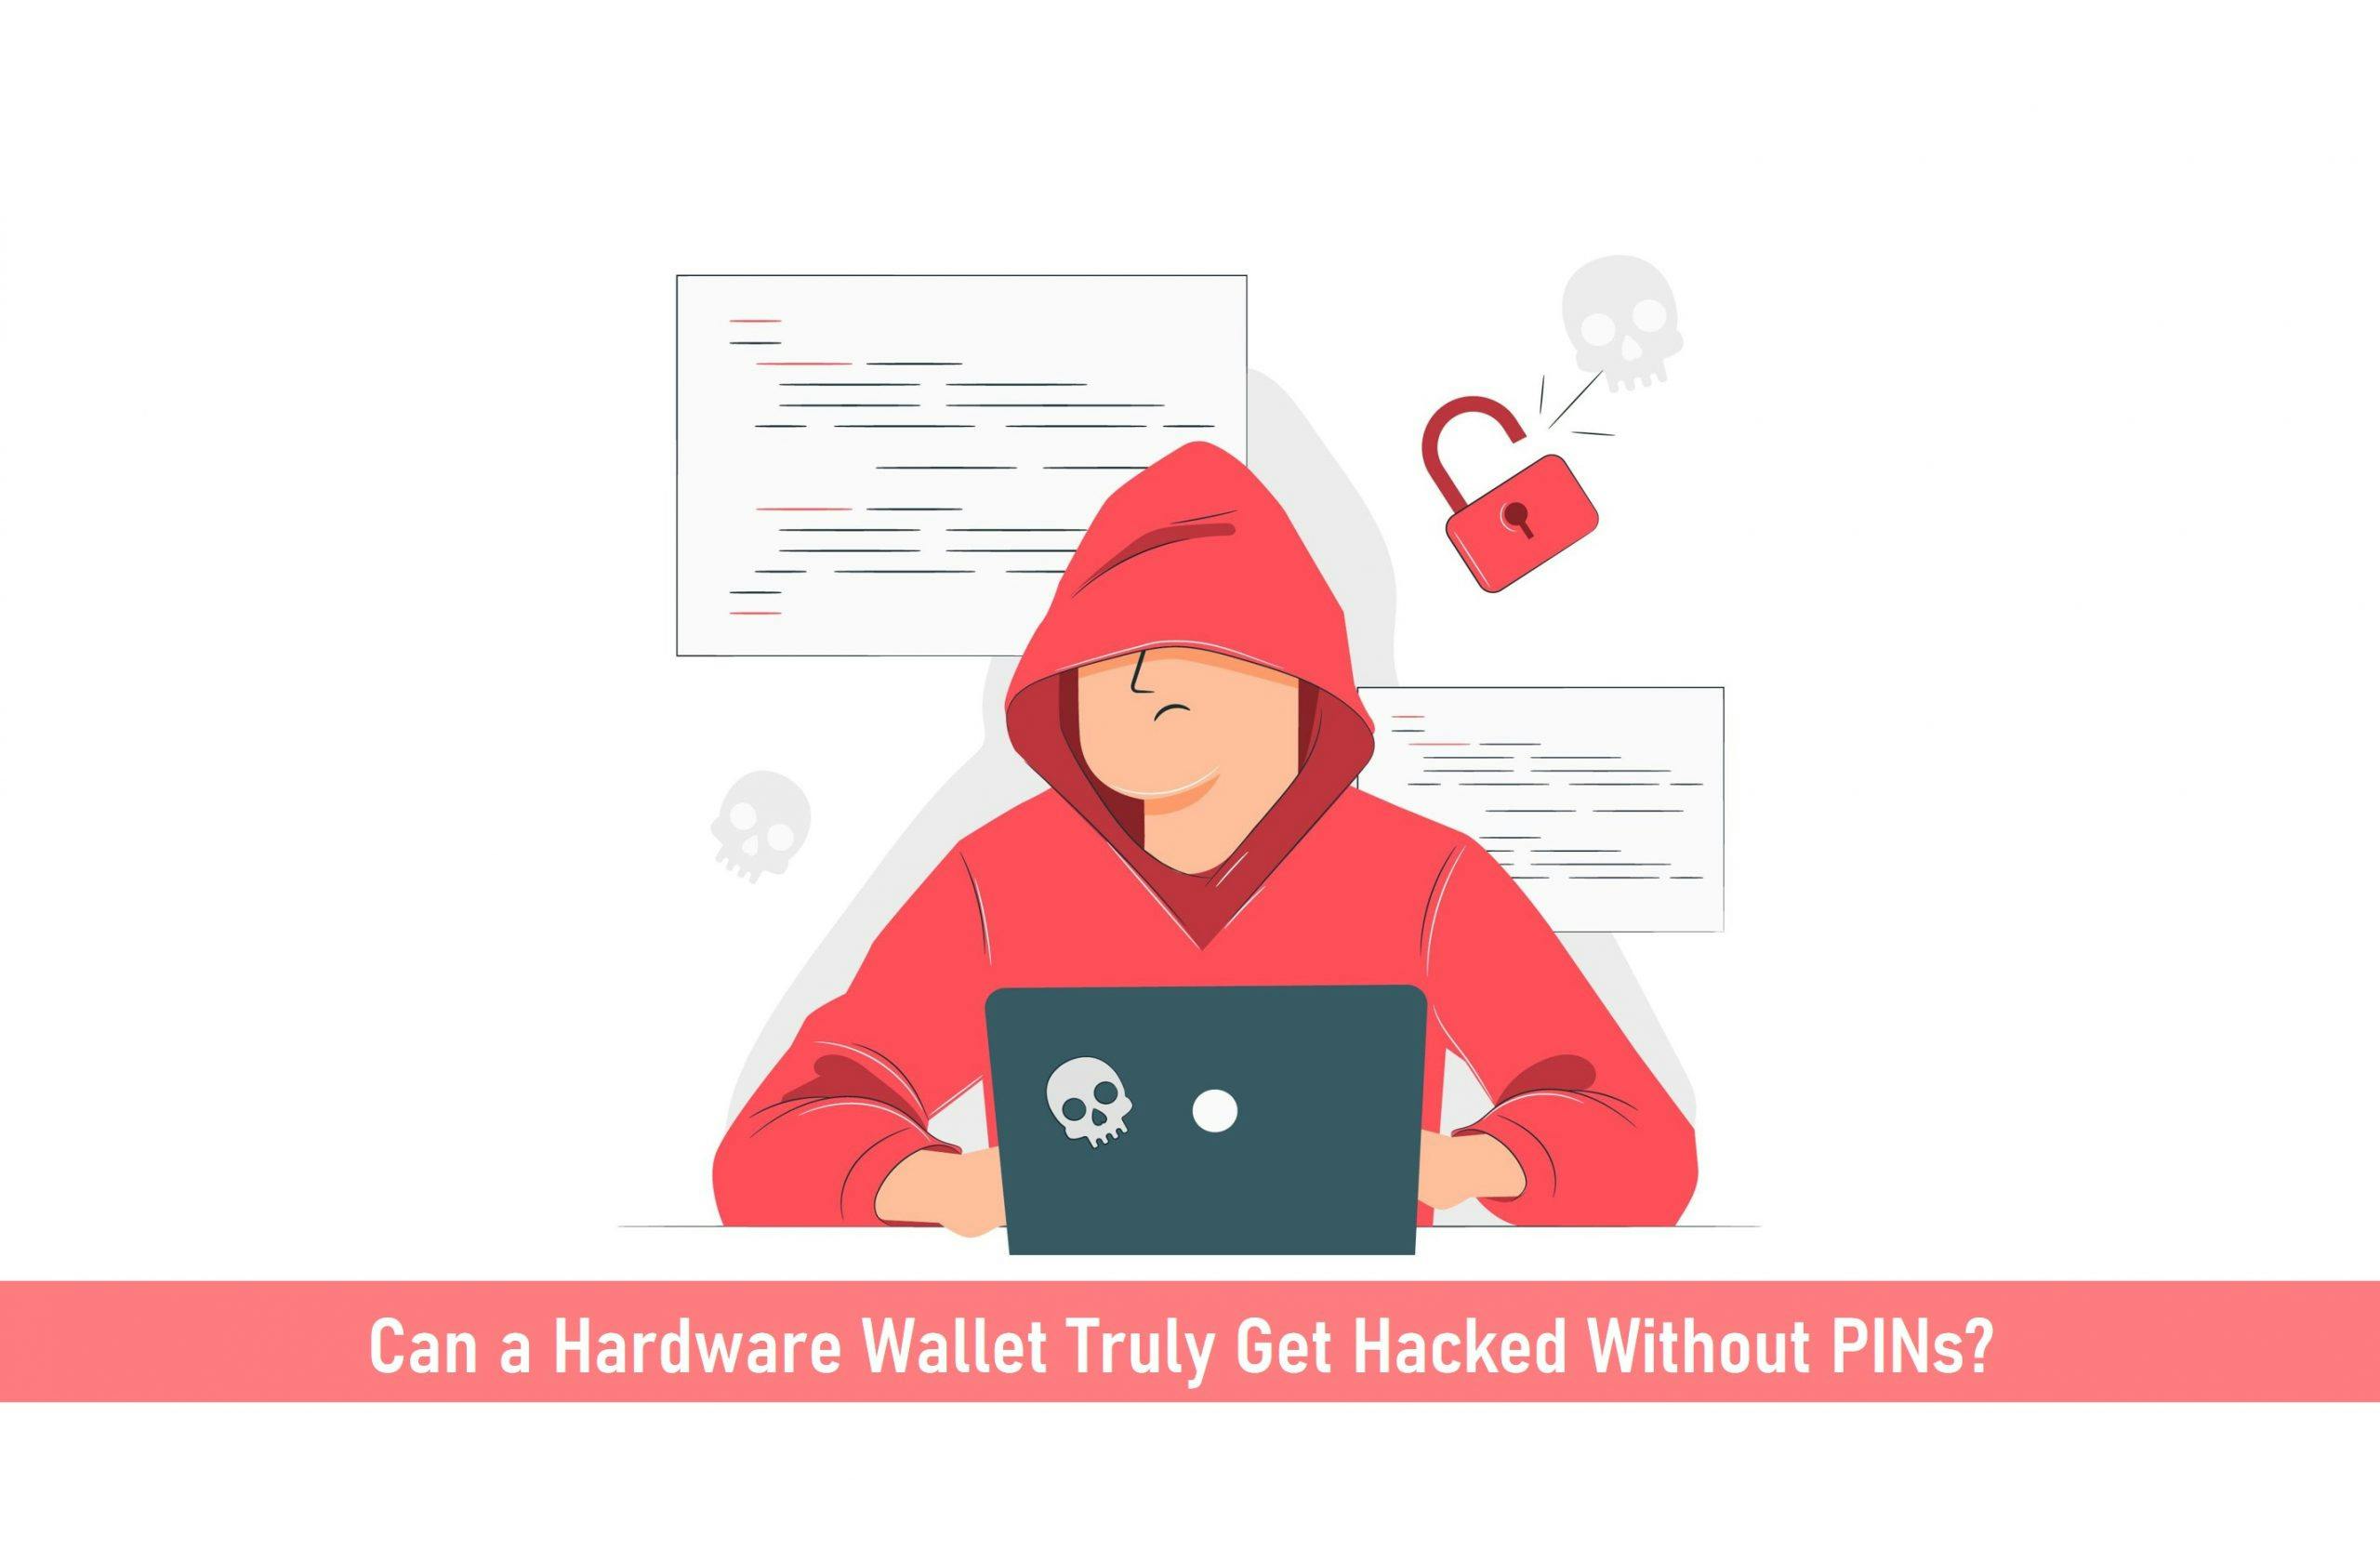 Can a Hardware Wallet Truly Get Hacked Without PINs?